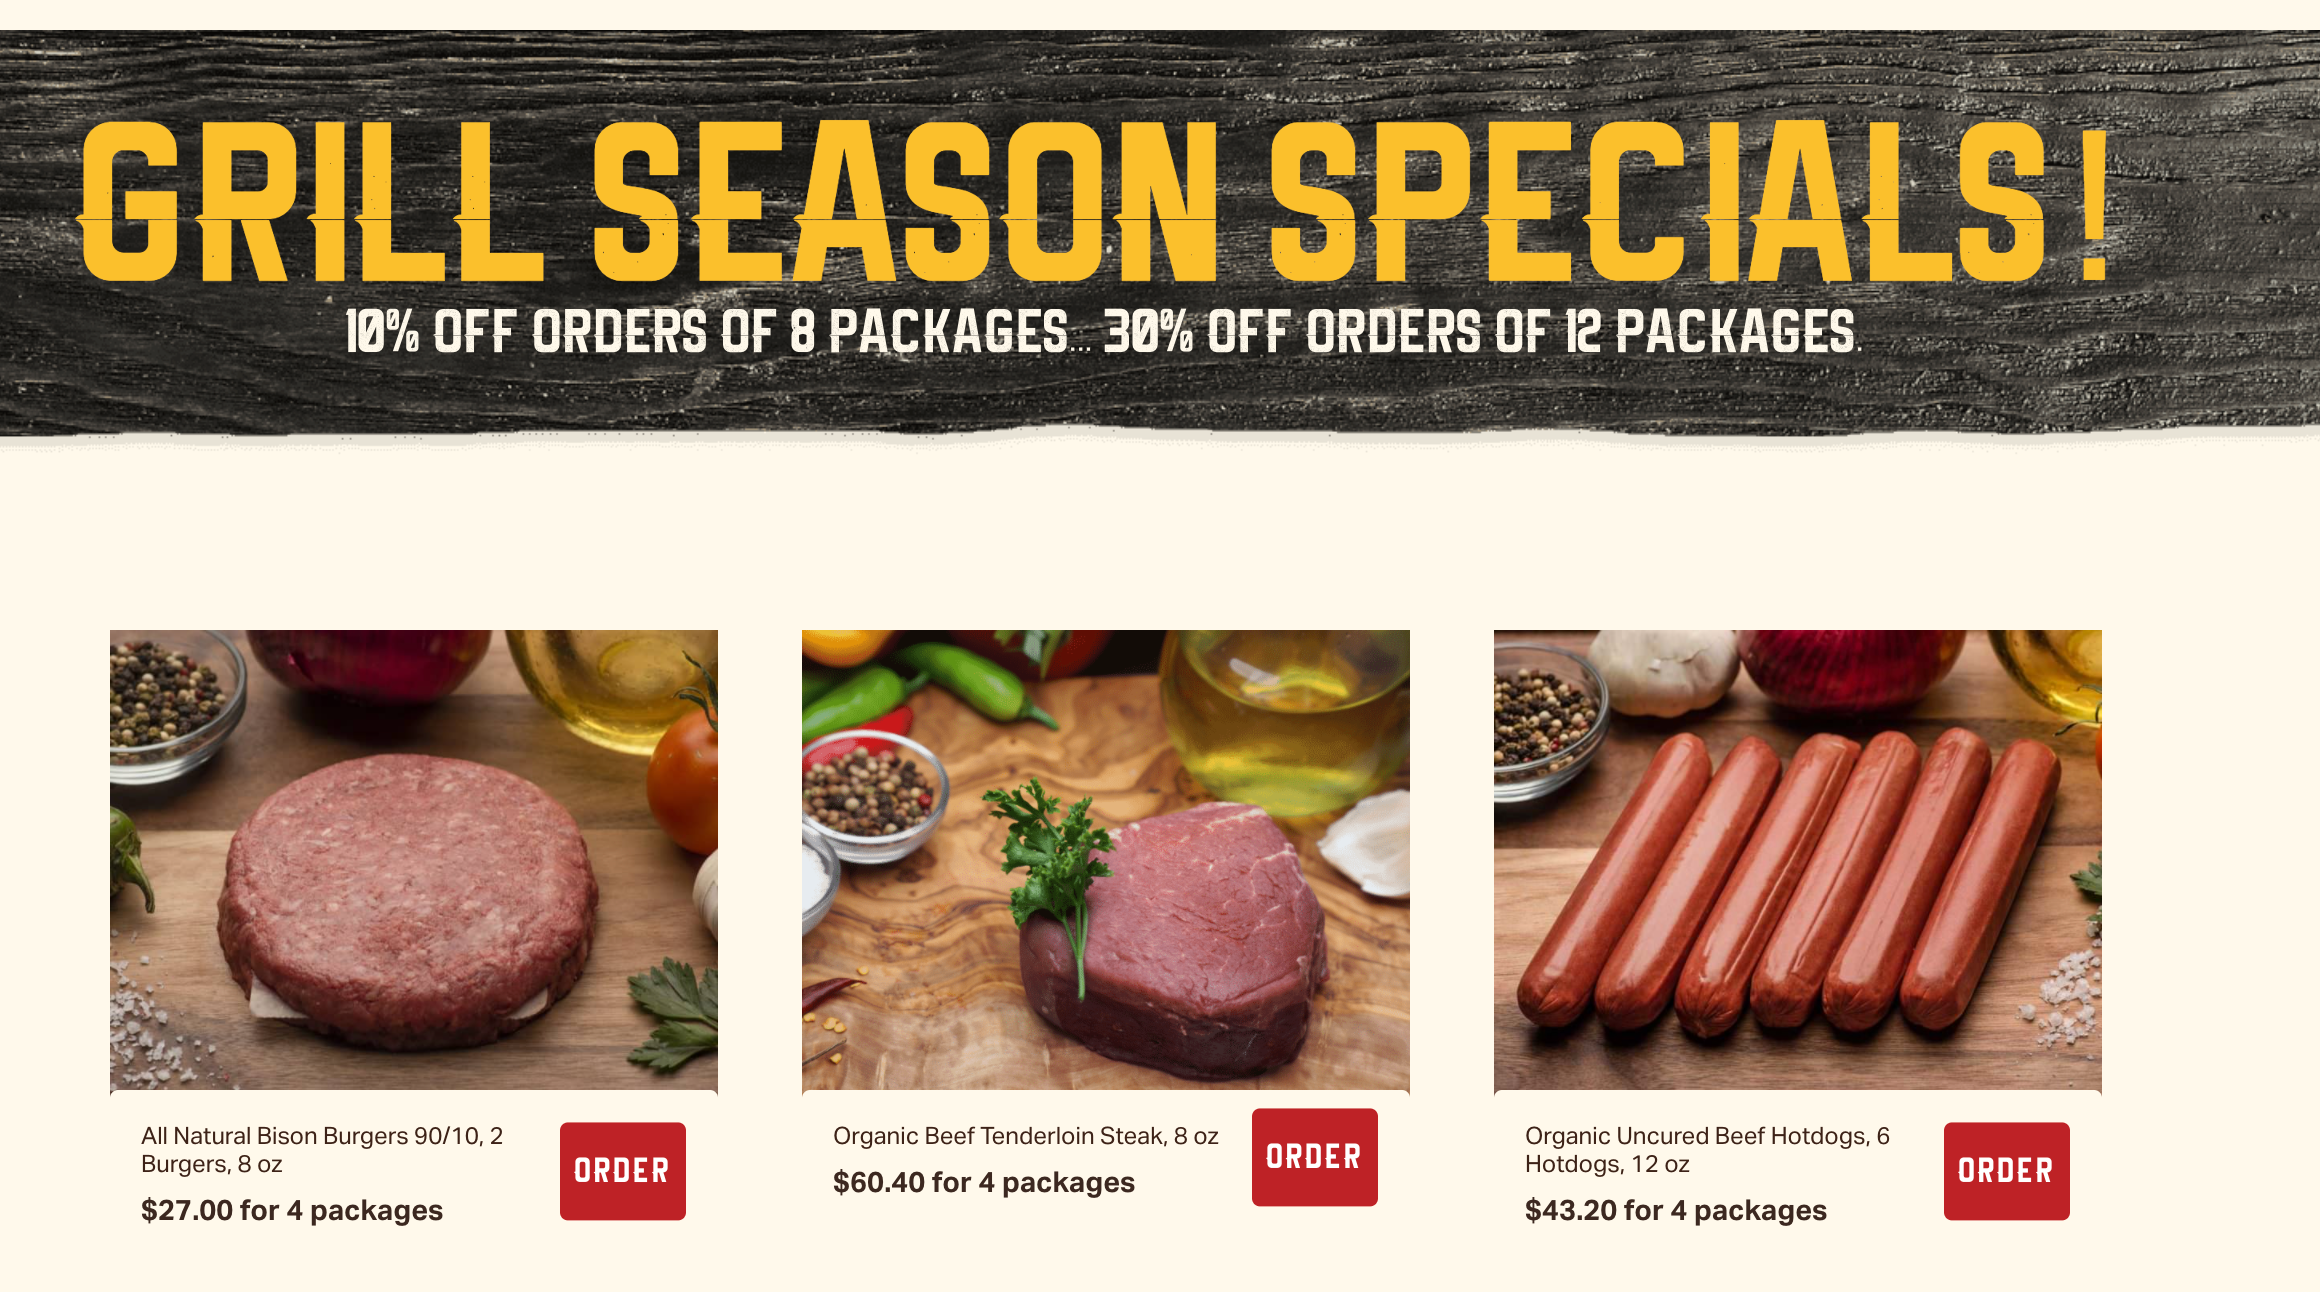 Grill season specials from Frontiere Natural Meats